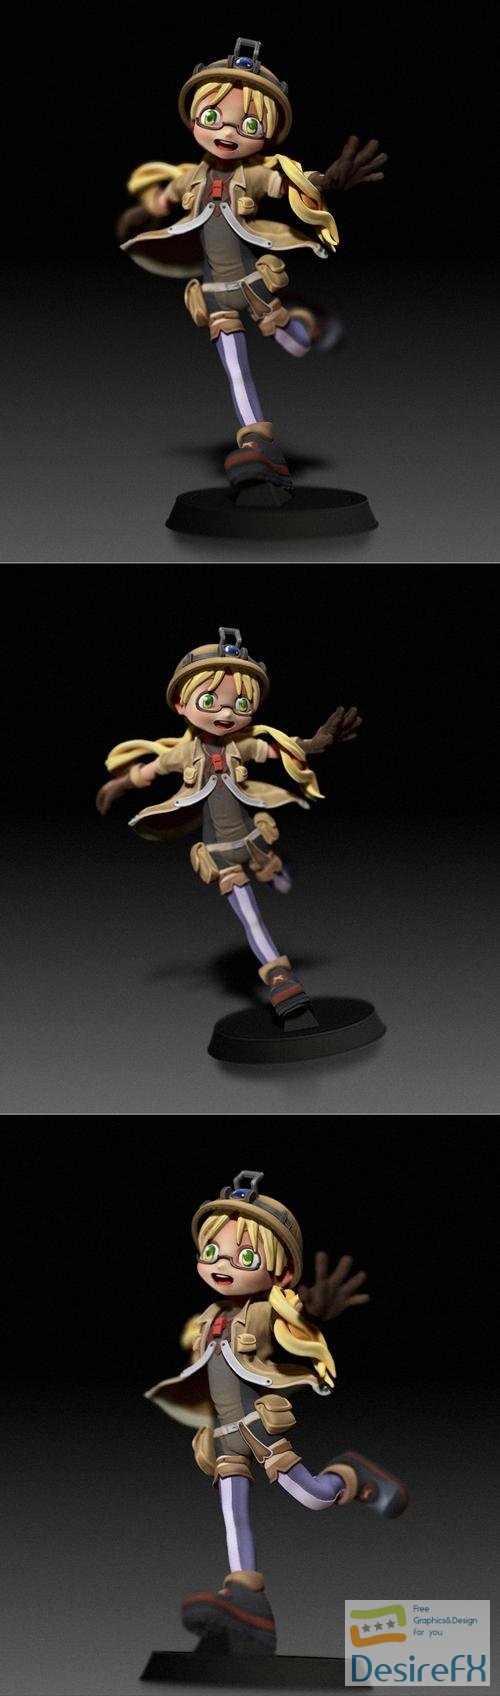 Riko - Made in Abyss Anime – 3D Print